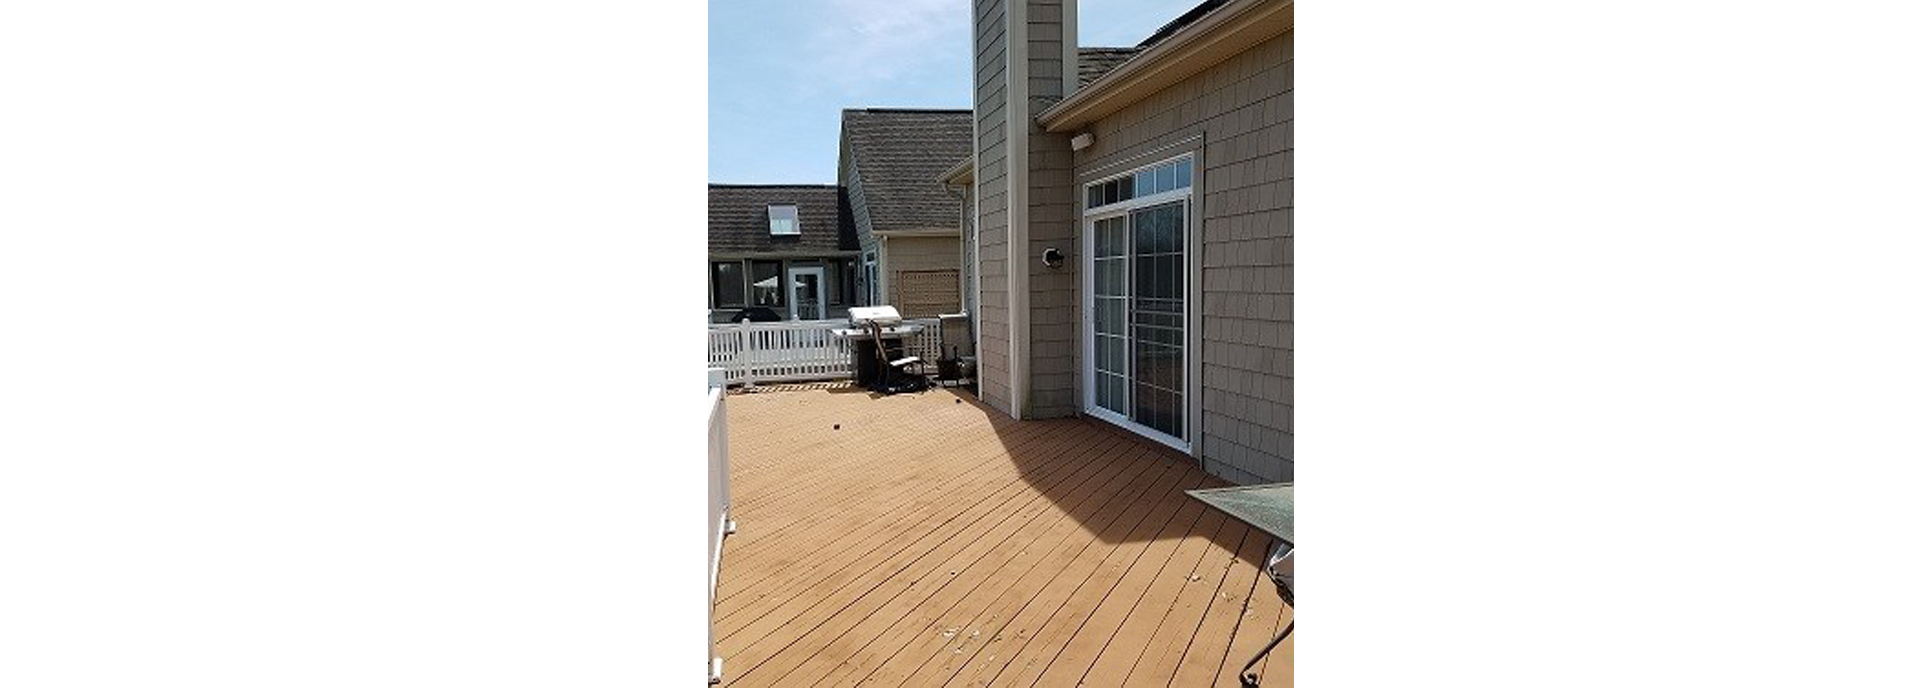 Deck Painting Before